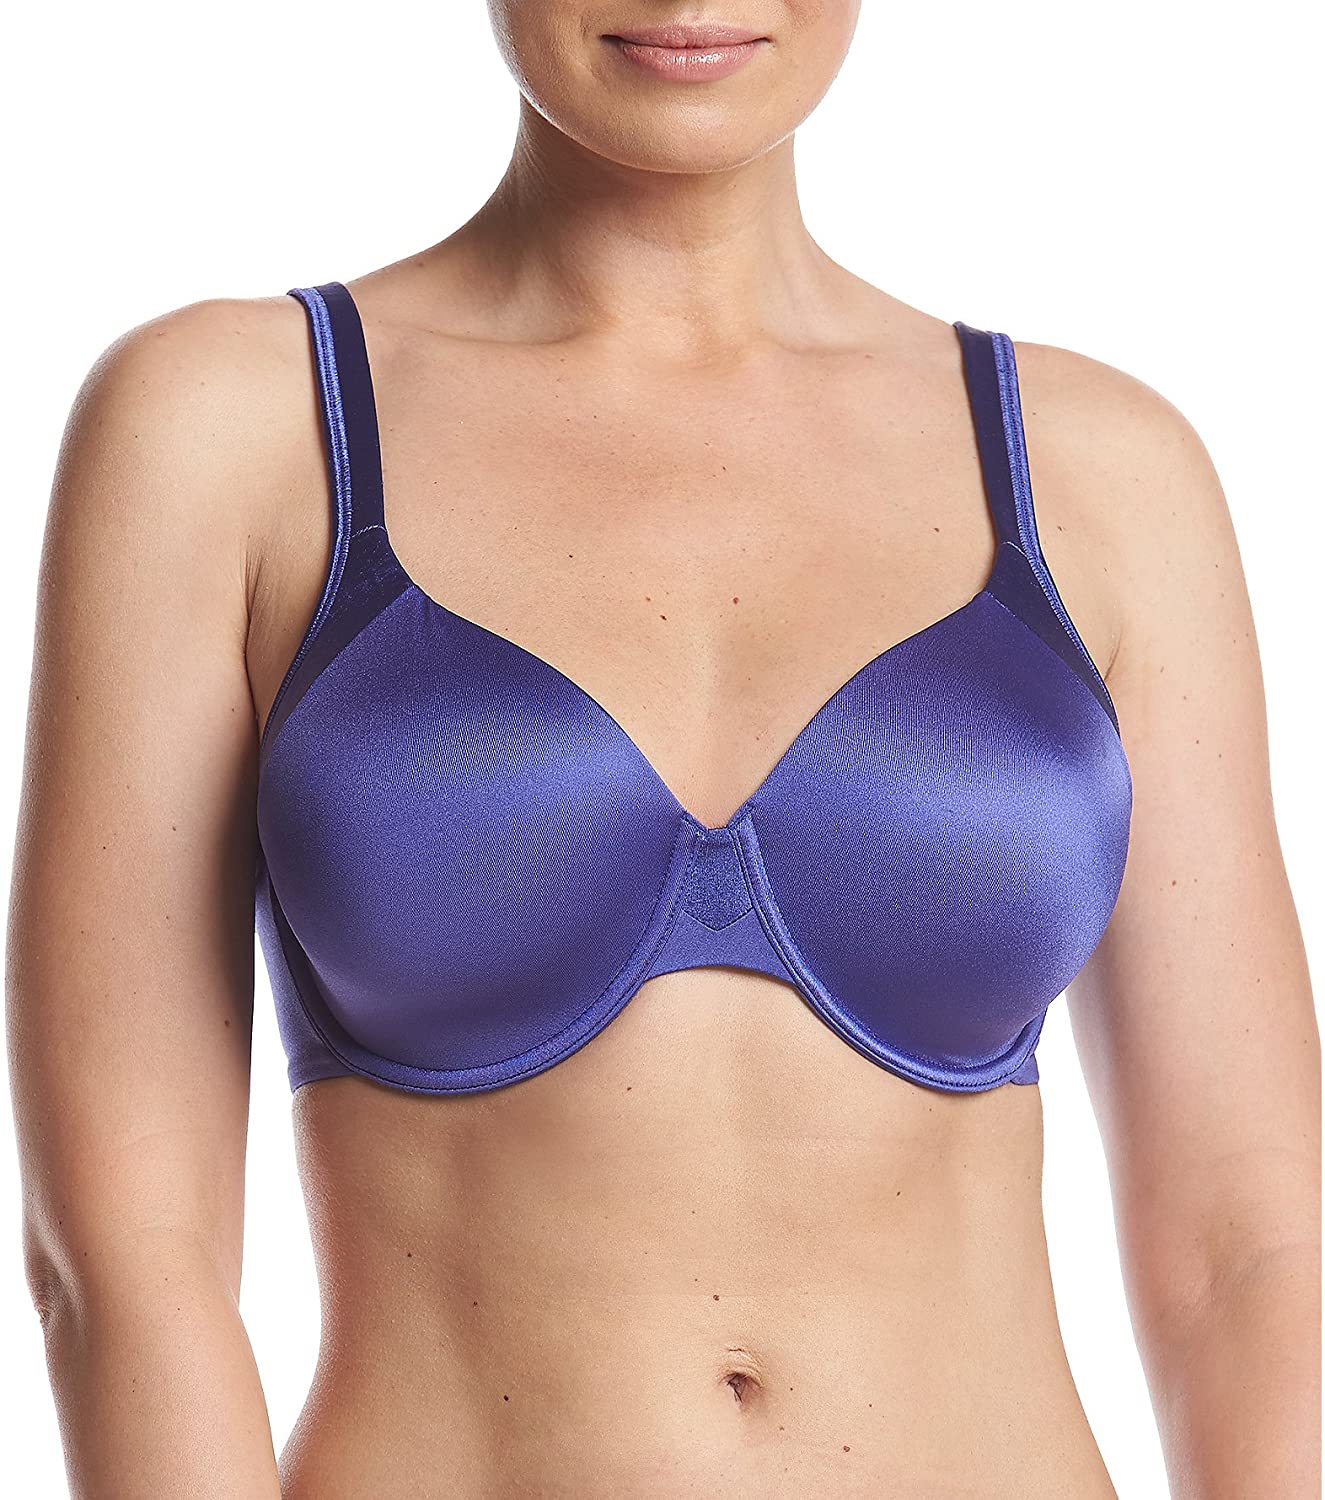 12 best bras for large busts herstylecode 2 12 Best Bras for Big Busts 2023 - Top Rated Bras for Bigger Busts